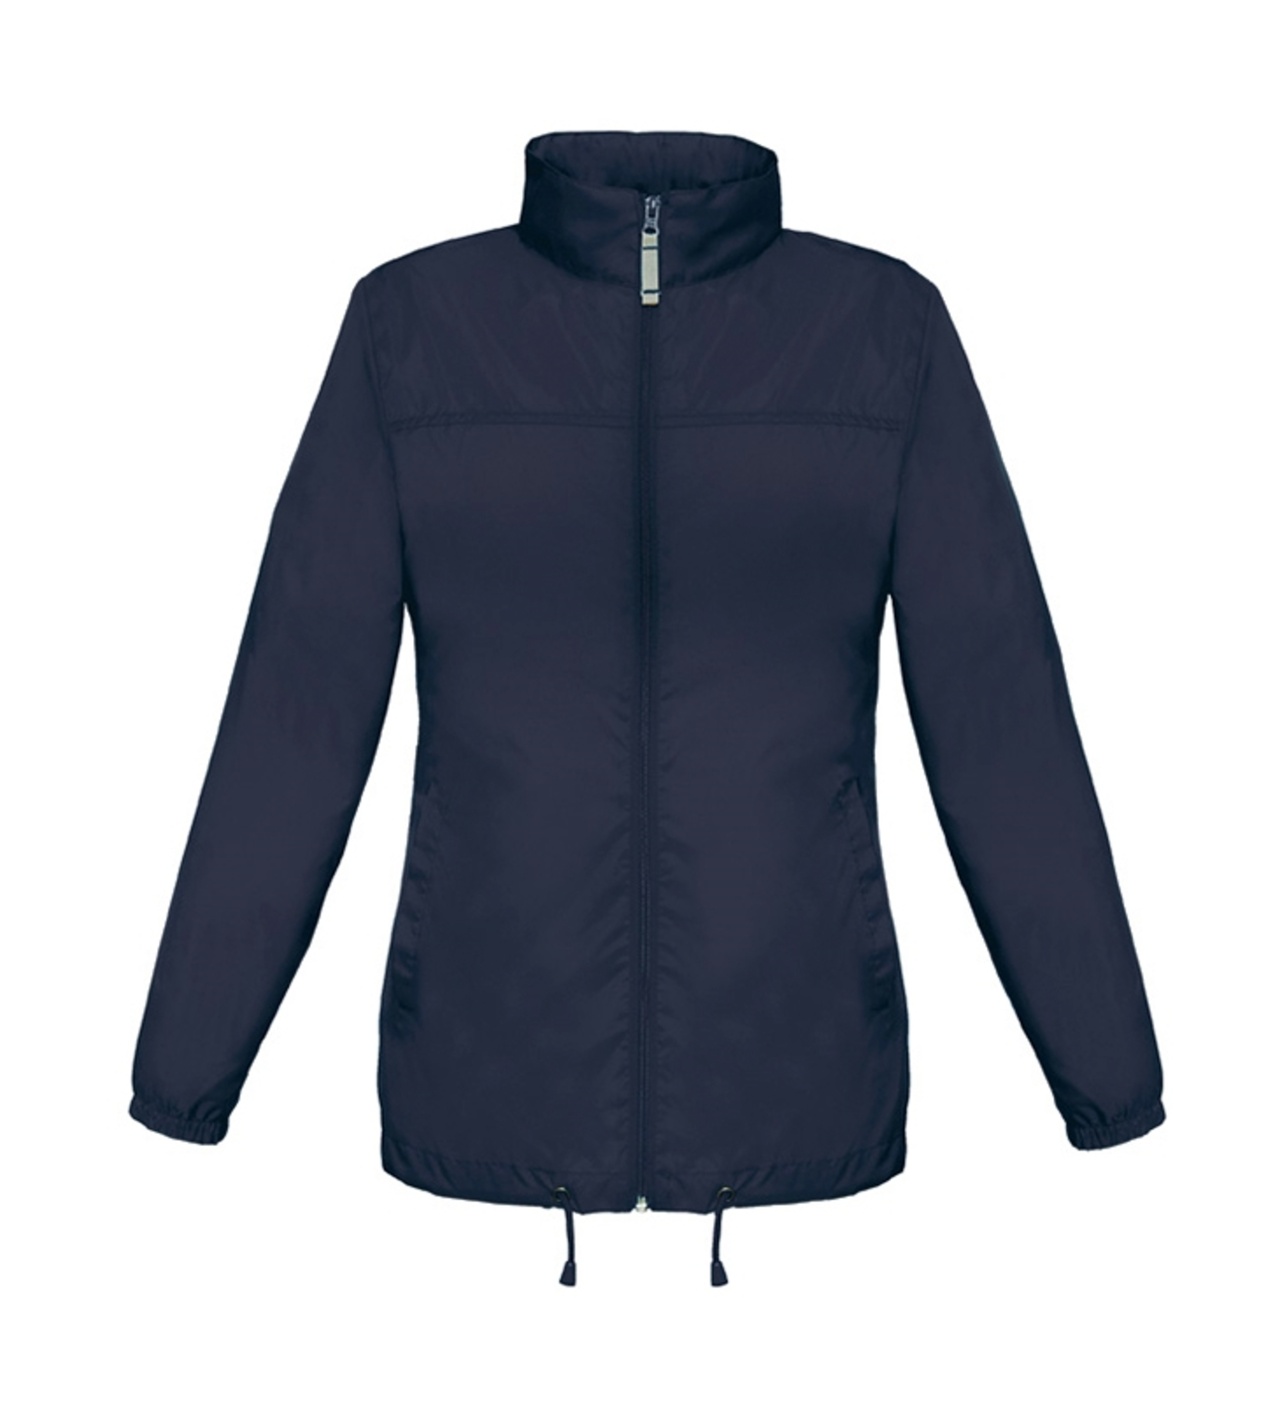 B and C Collection Sirocco Woman - Navy - S